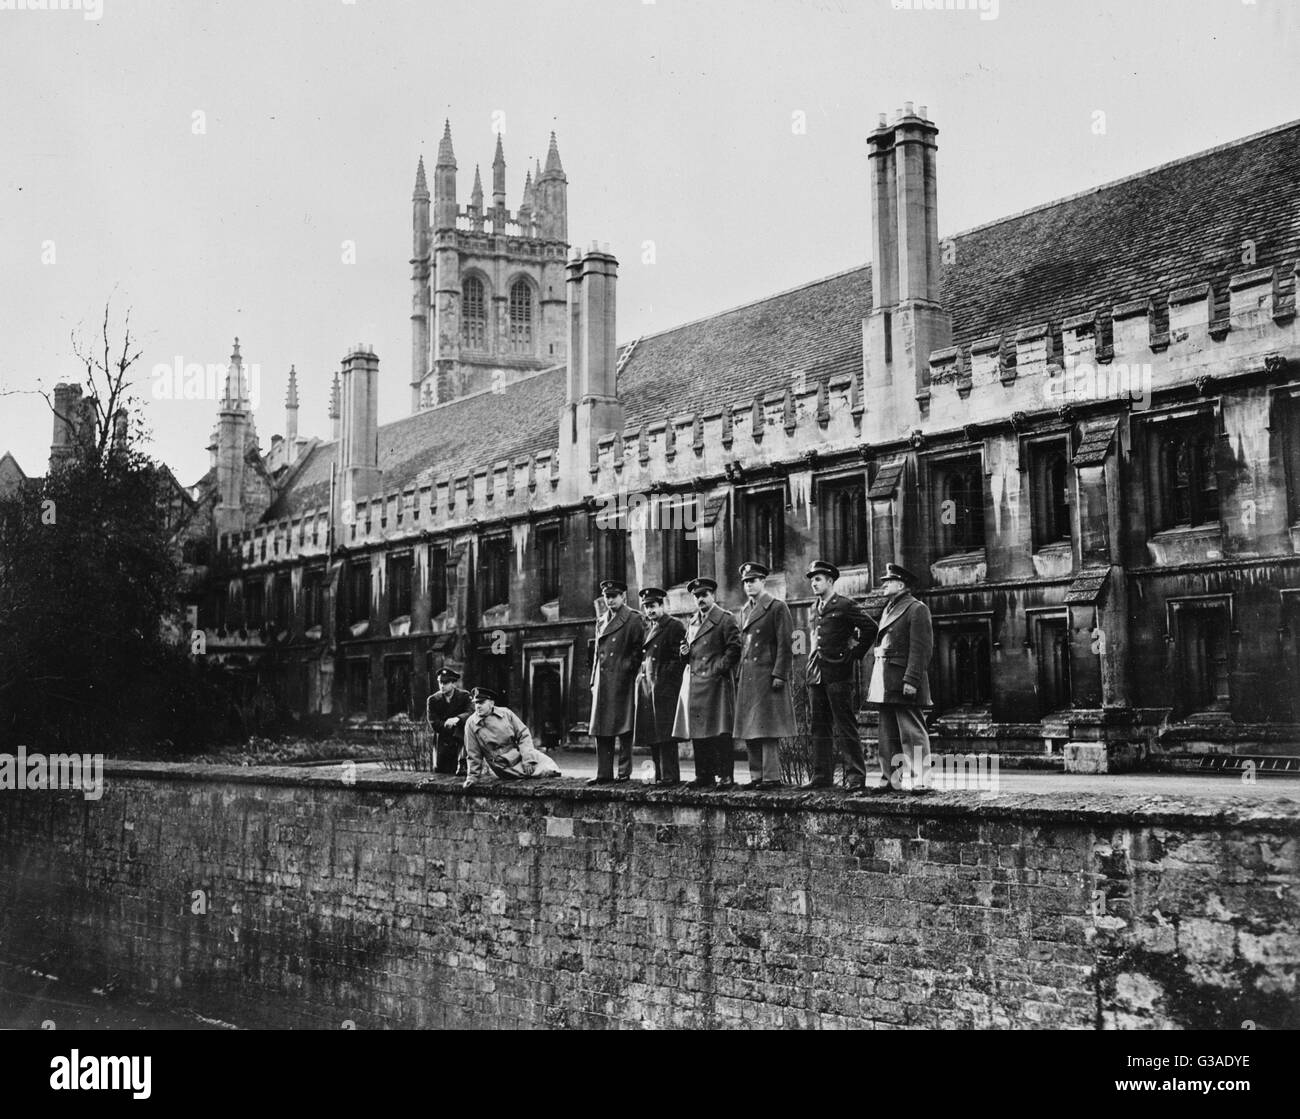 Oxford England. American Army men, attending Oxford University for special courses given by distinguished educators, view the Thames River following one of their classes. The tower and buildings of Magdalen college form the background. Left to right: Priv Stock Photo